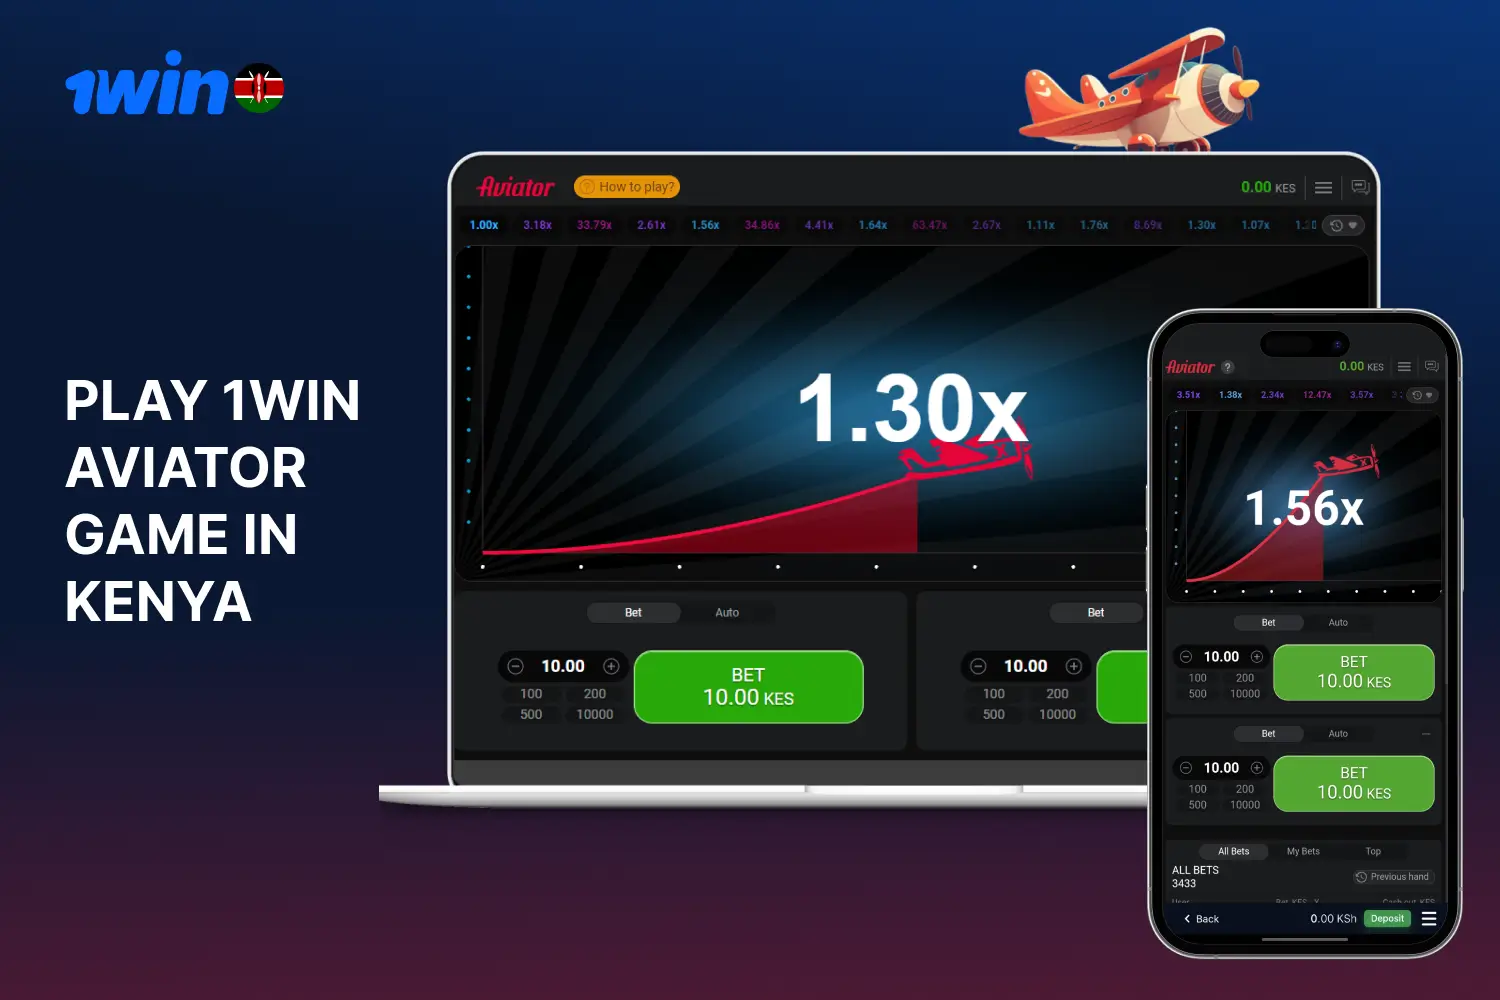 The Aviator game is available for players from Kenya both on the website and in the 1win casino app